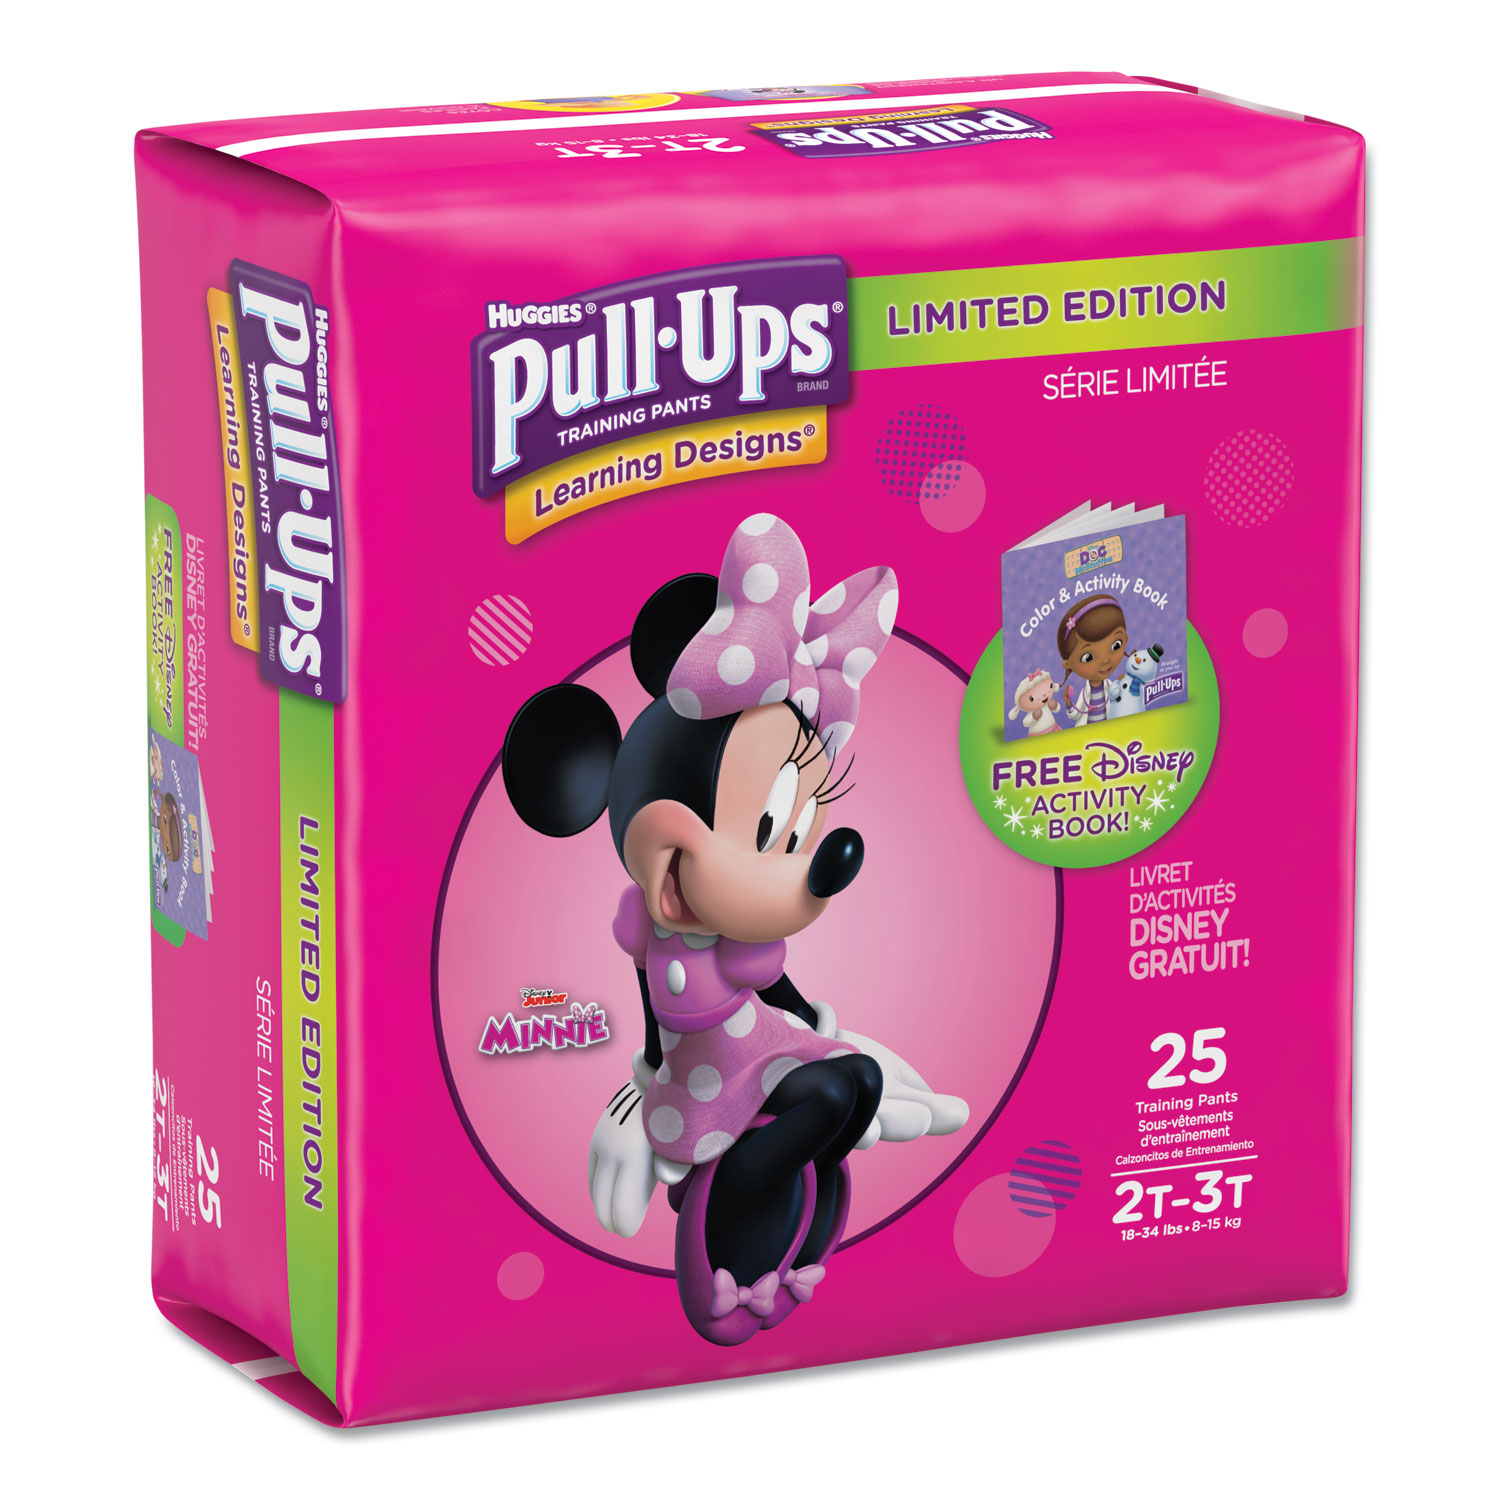 Pull-Ups Learning Designs Potty Training Pants for Girls, Size 2T-3T, 25/Pack